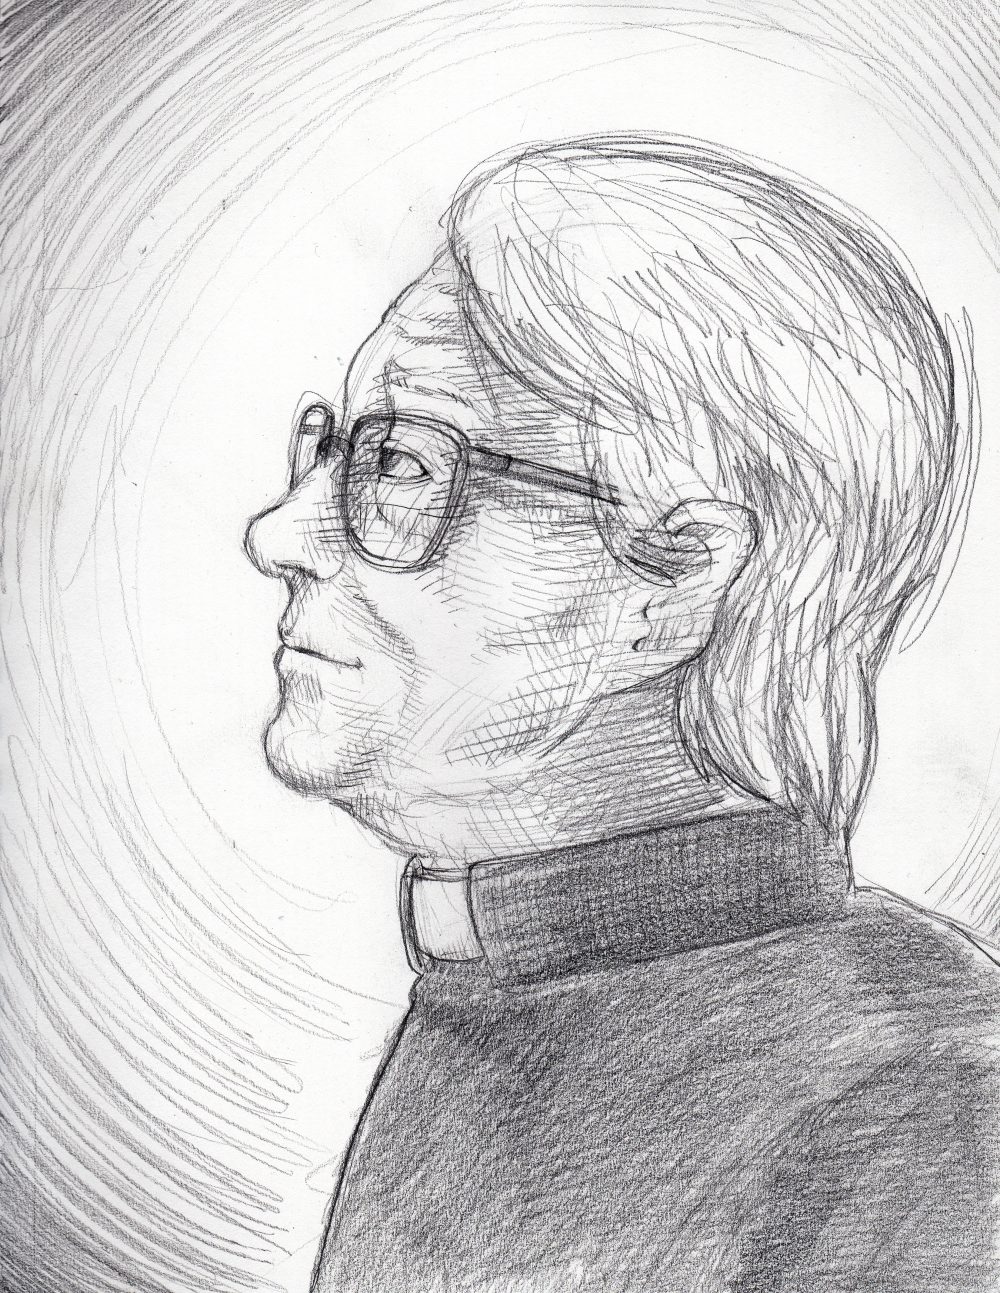 An image of Father Daniel Salat in left-facing profile, looking to picture-left. He is wearing a dark shirt with a priest's collar. He has mussed-up white hair, old-fashioned 1960s style glasses and is dressed as a priest. He has a rounded, wrinkled face and looks to be in his mid-to-late-70s in age. His expression is reverent.